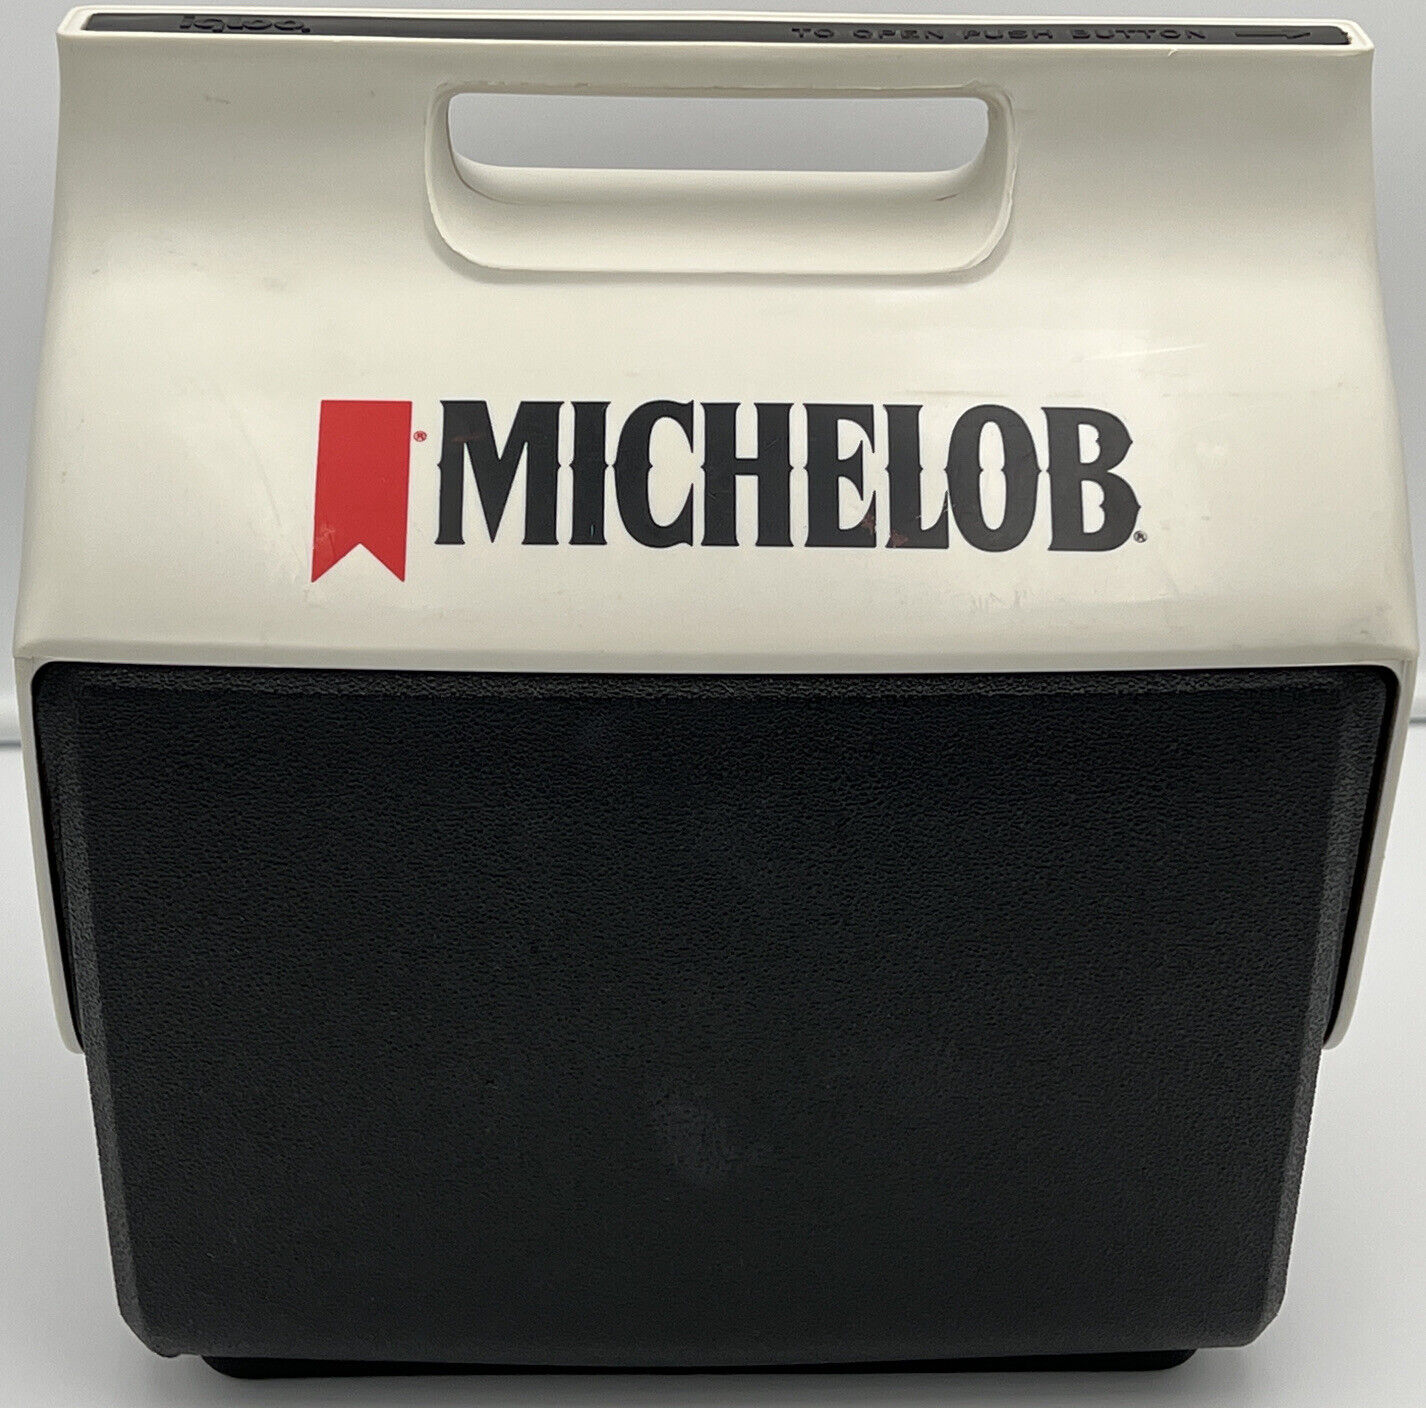 Michelob Igloo Playmate Cooler Lunch mate Black 1986 VINTAGE RARE, HARD TO FIND